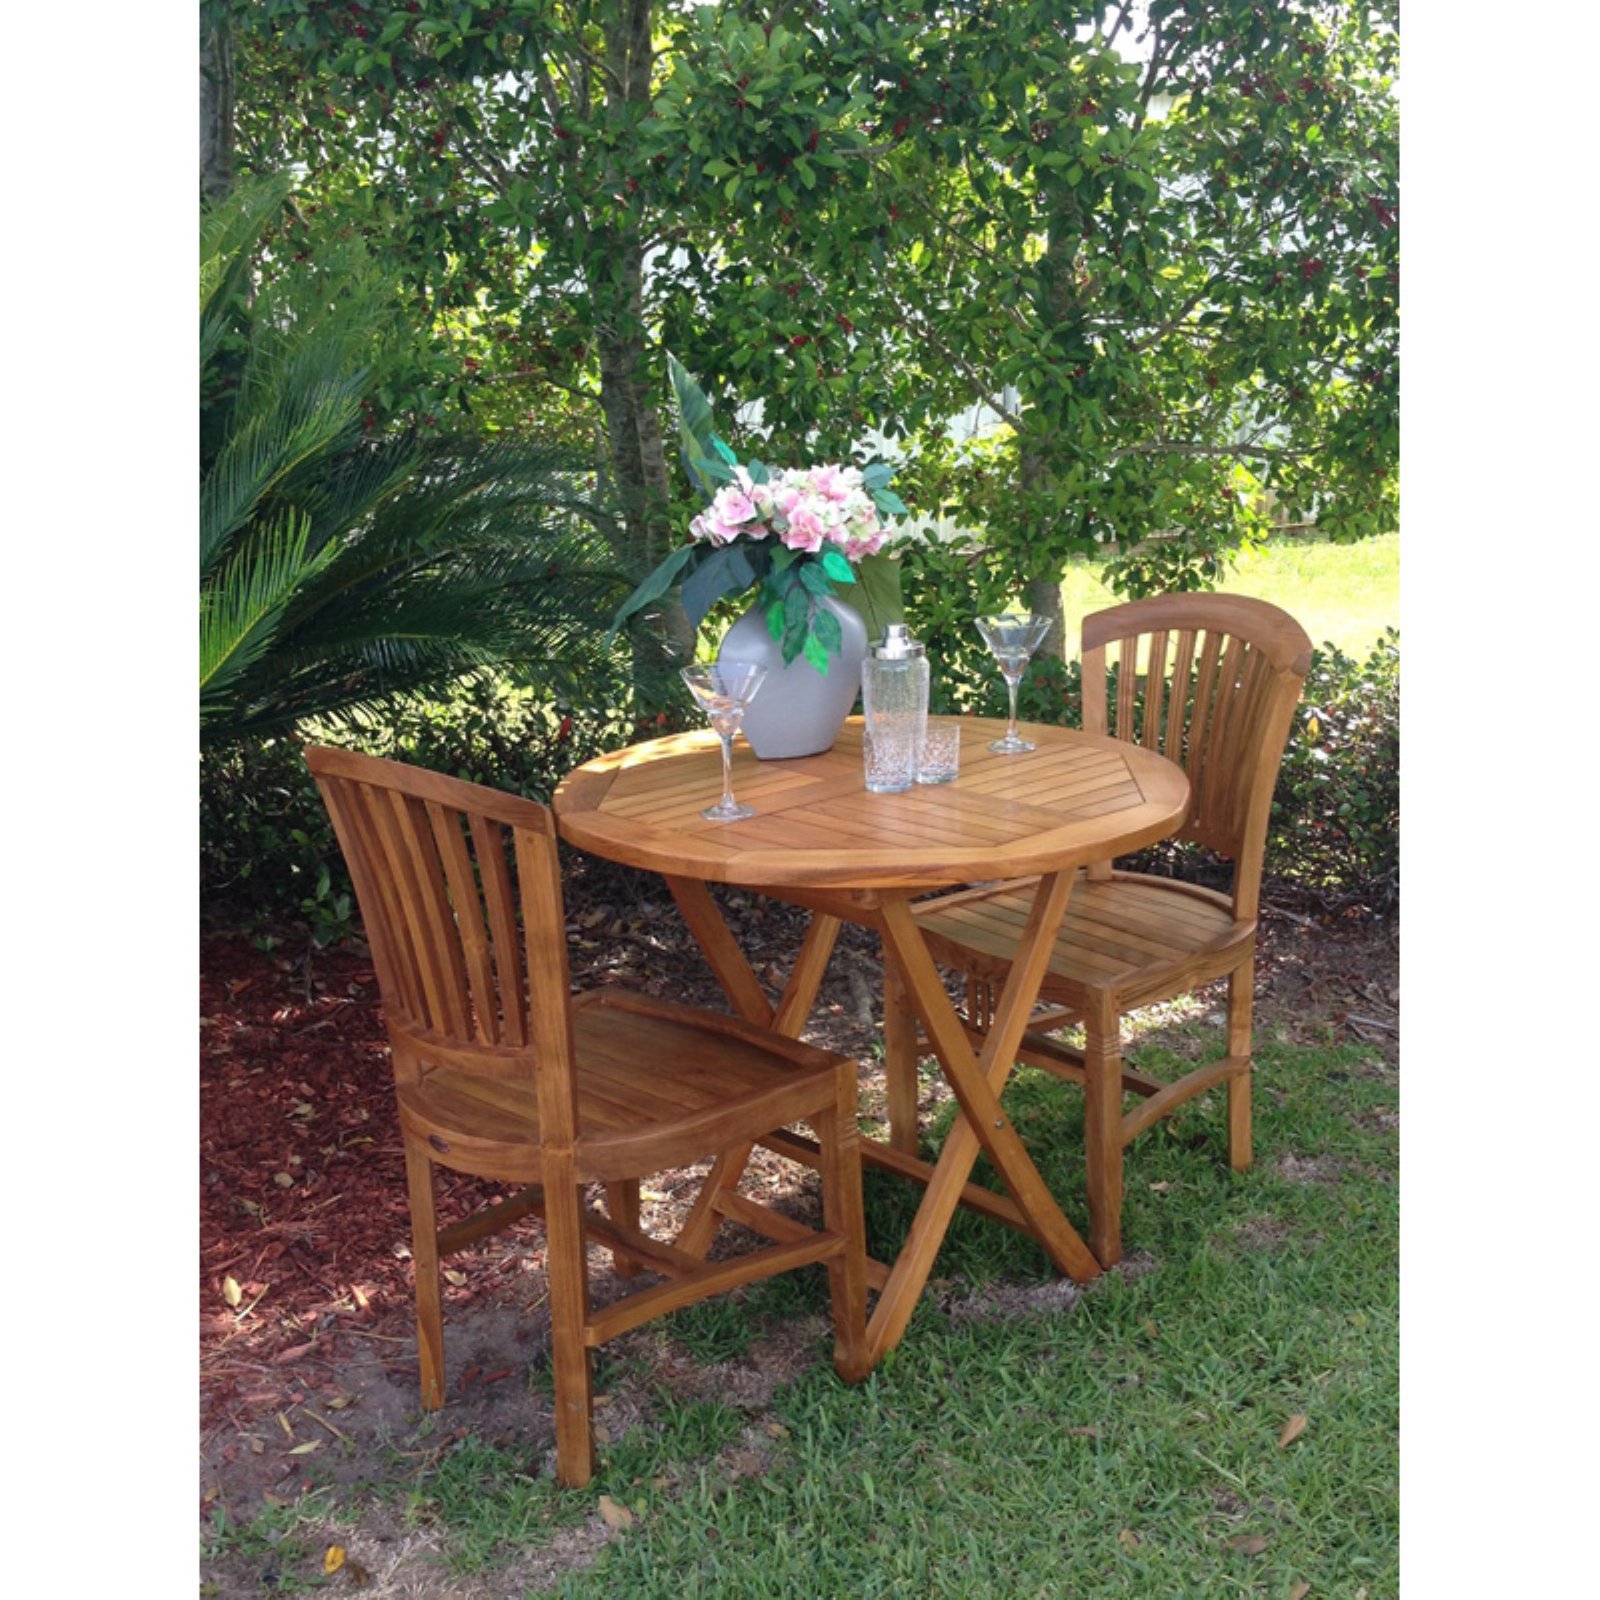 Chic Teak Orleans 3 Piece Patio Bistro Set with Optional Cushions - image 2 of 6